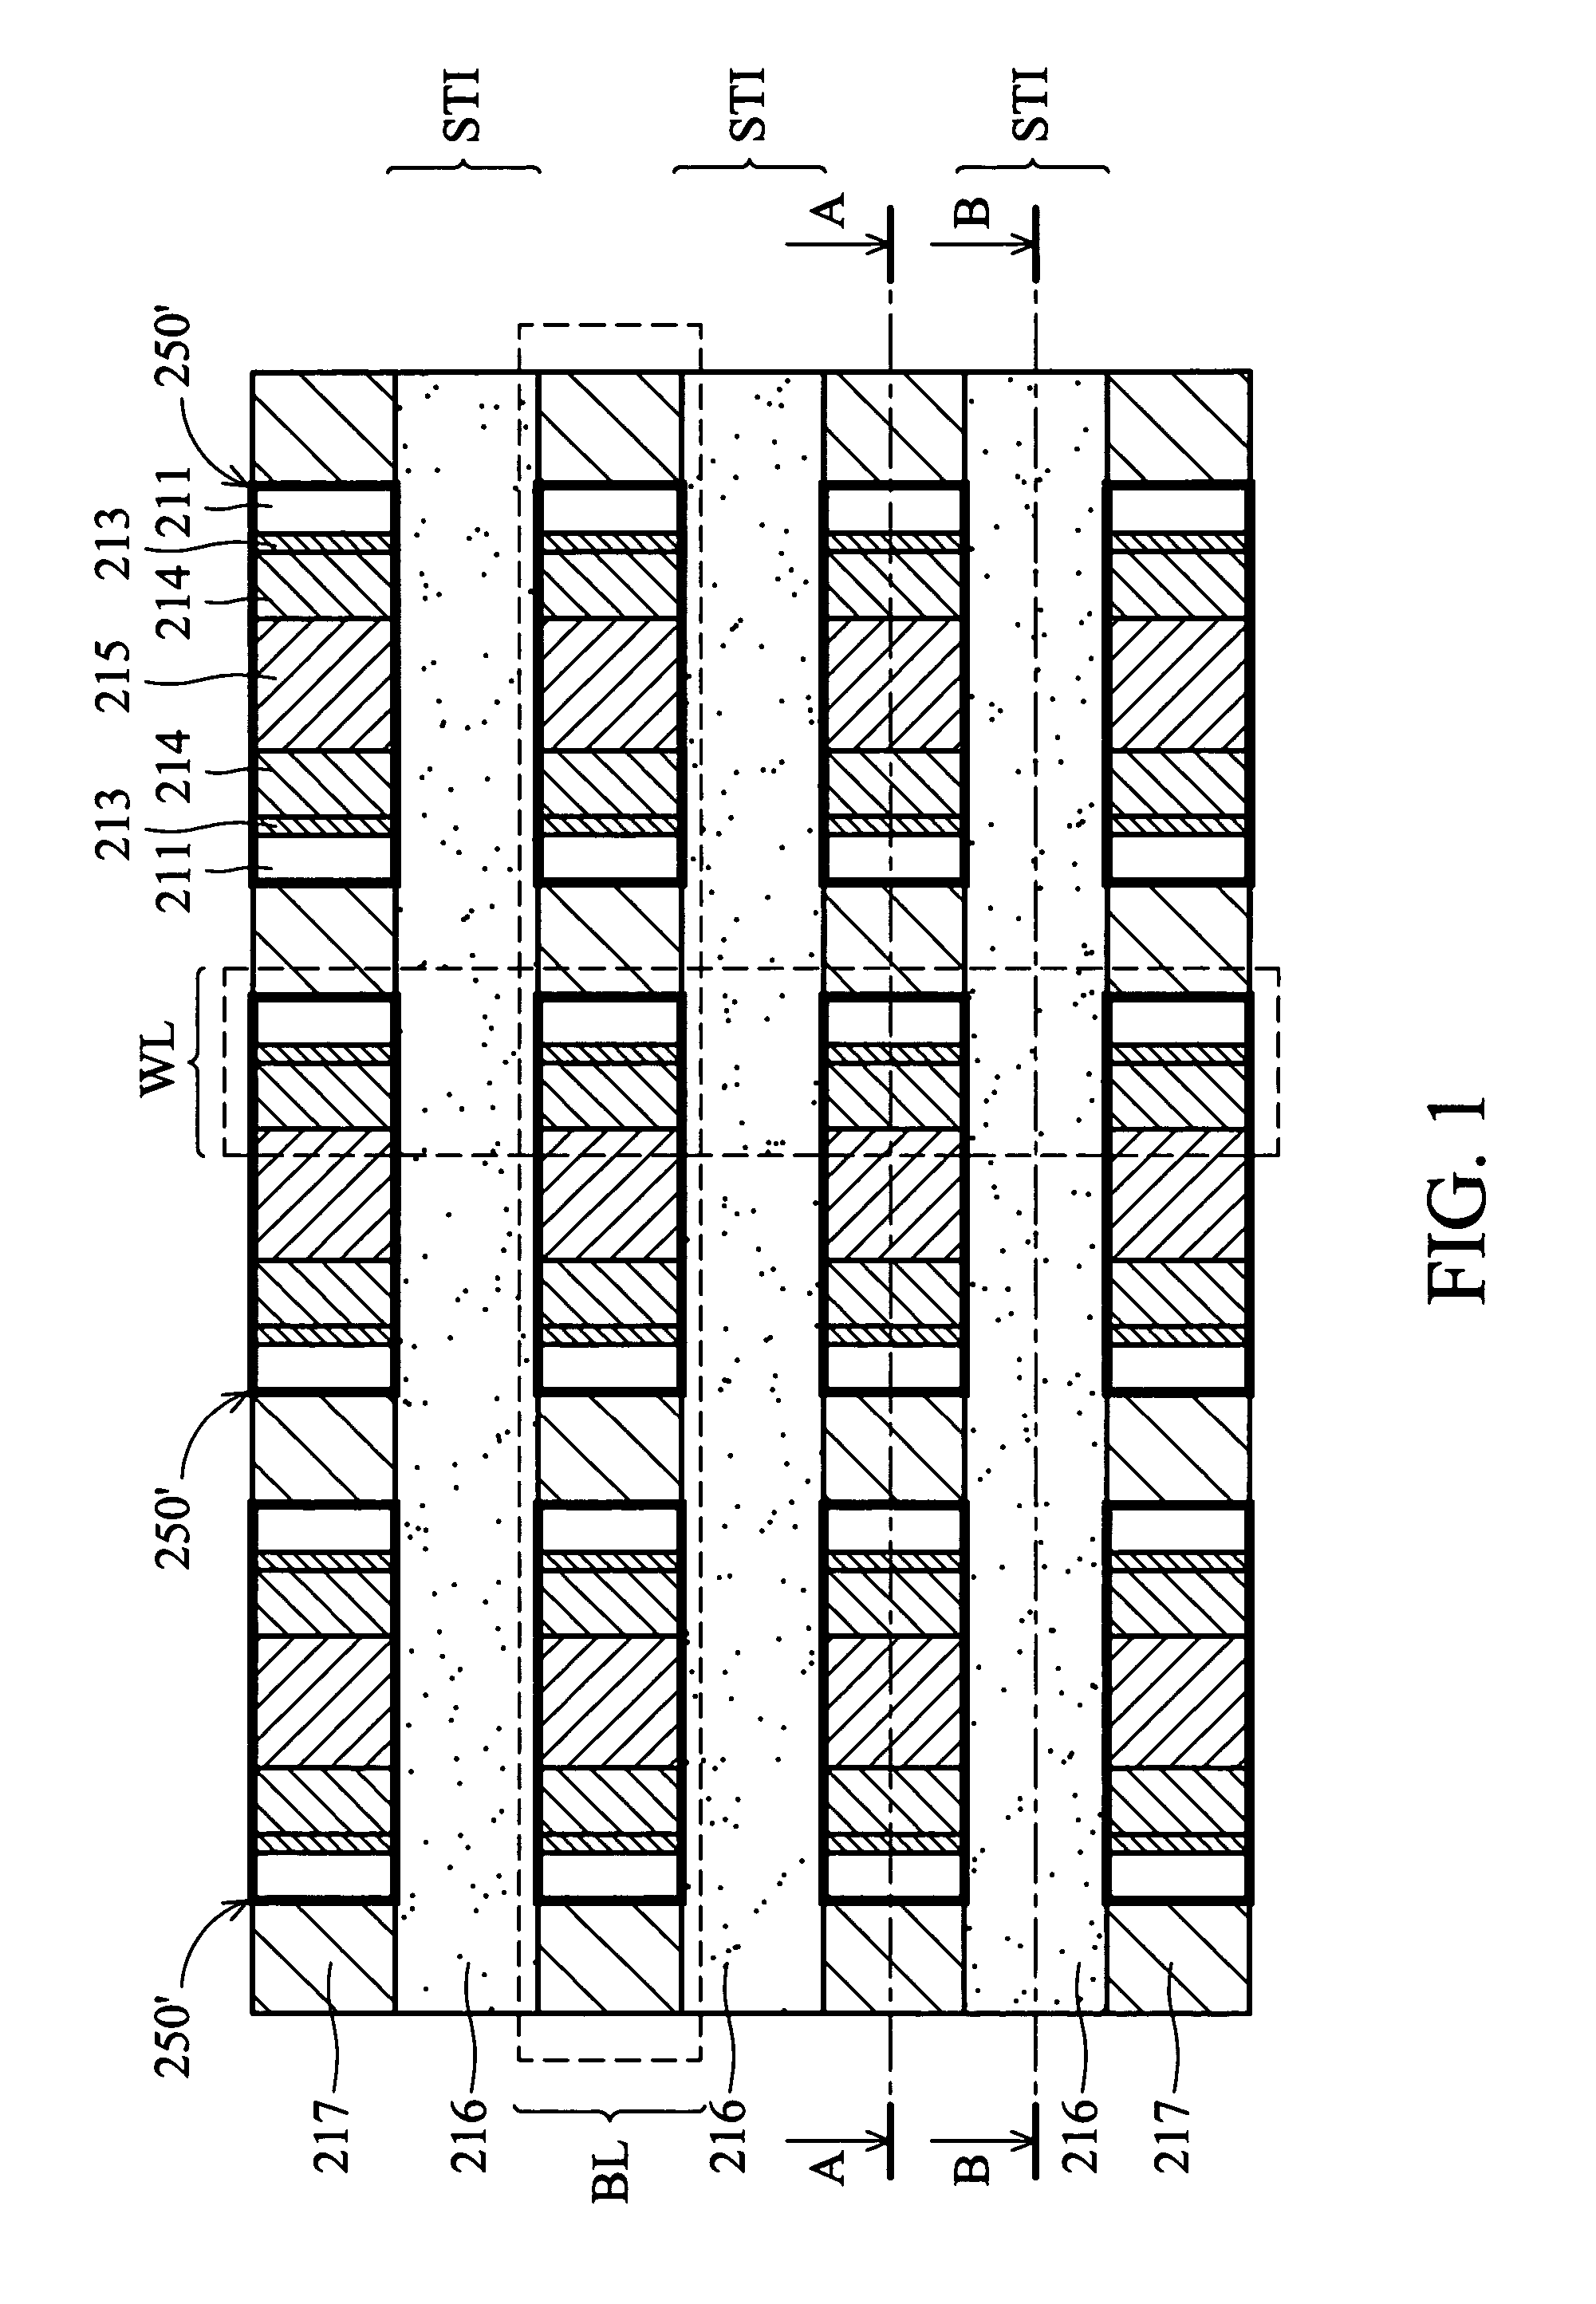 Stacked gate flash memory device and method of fabricating the same